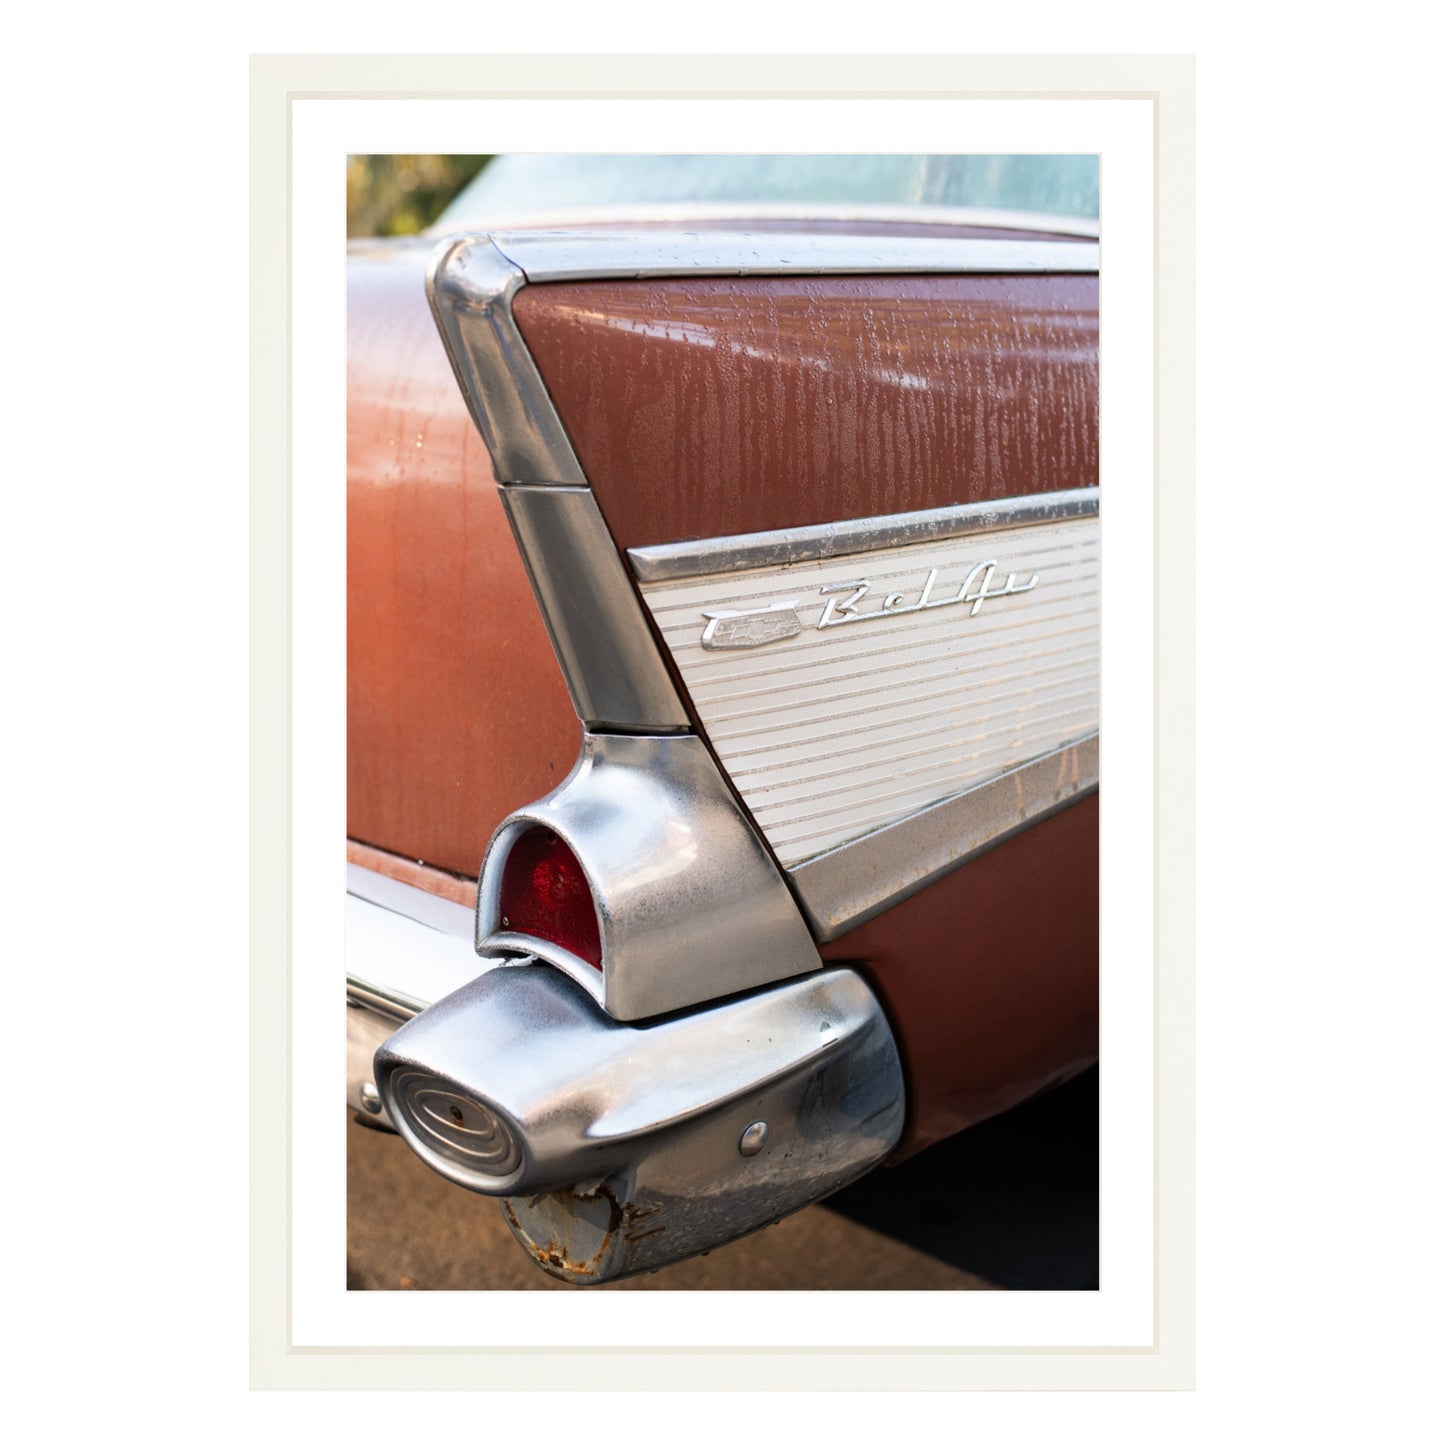 Photograph of vintage Chevy Bel Air in San Francisco in white frame with white mat